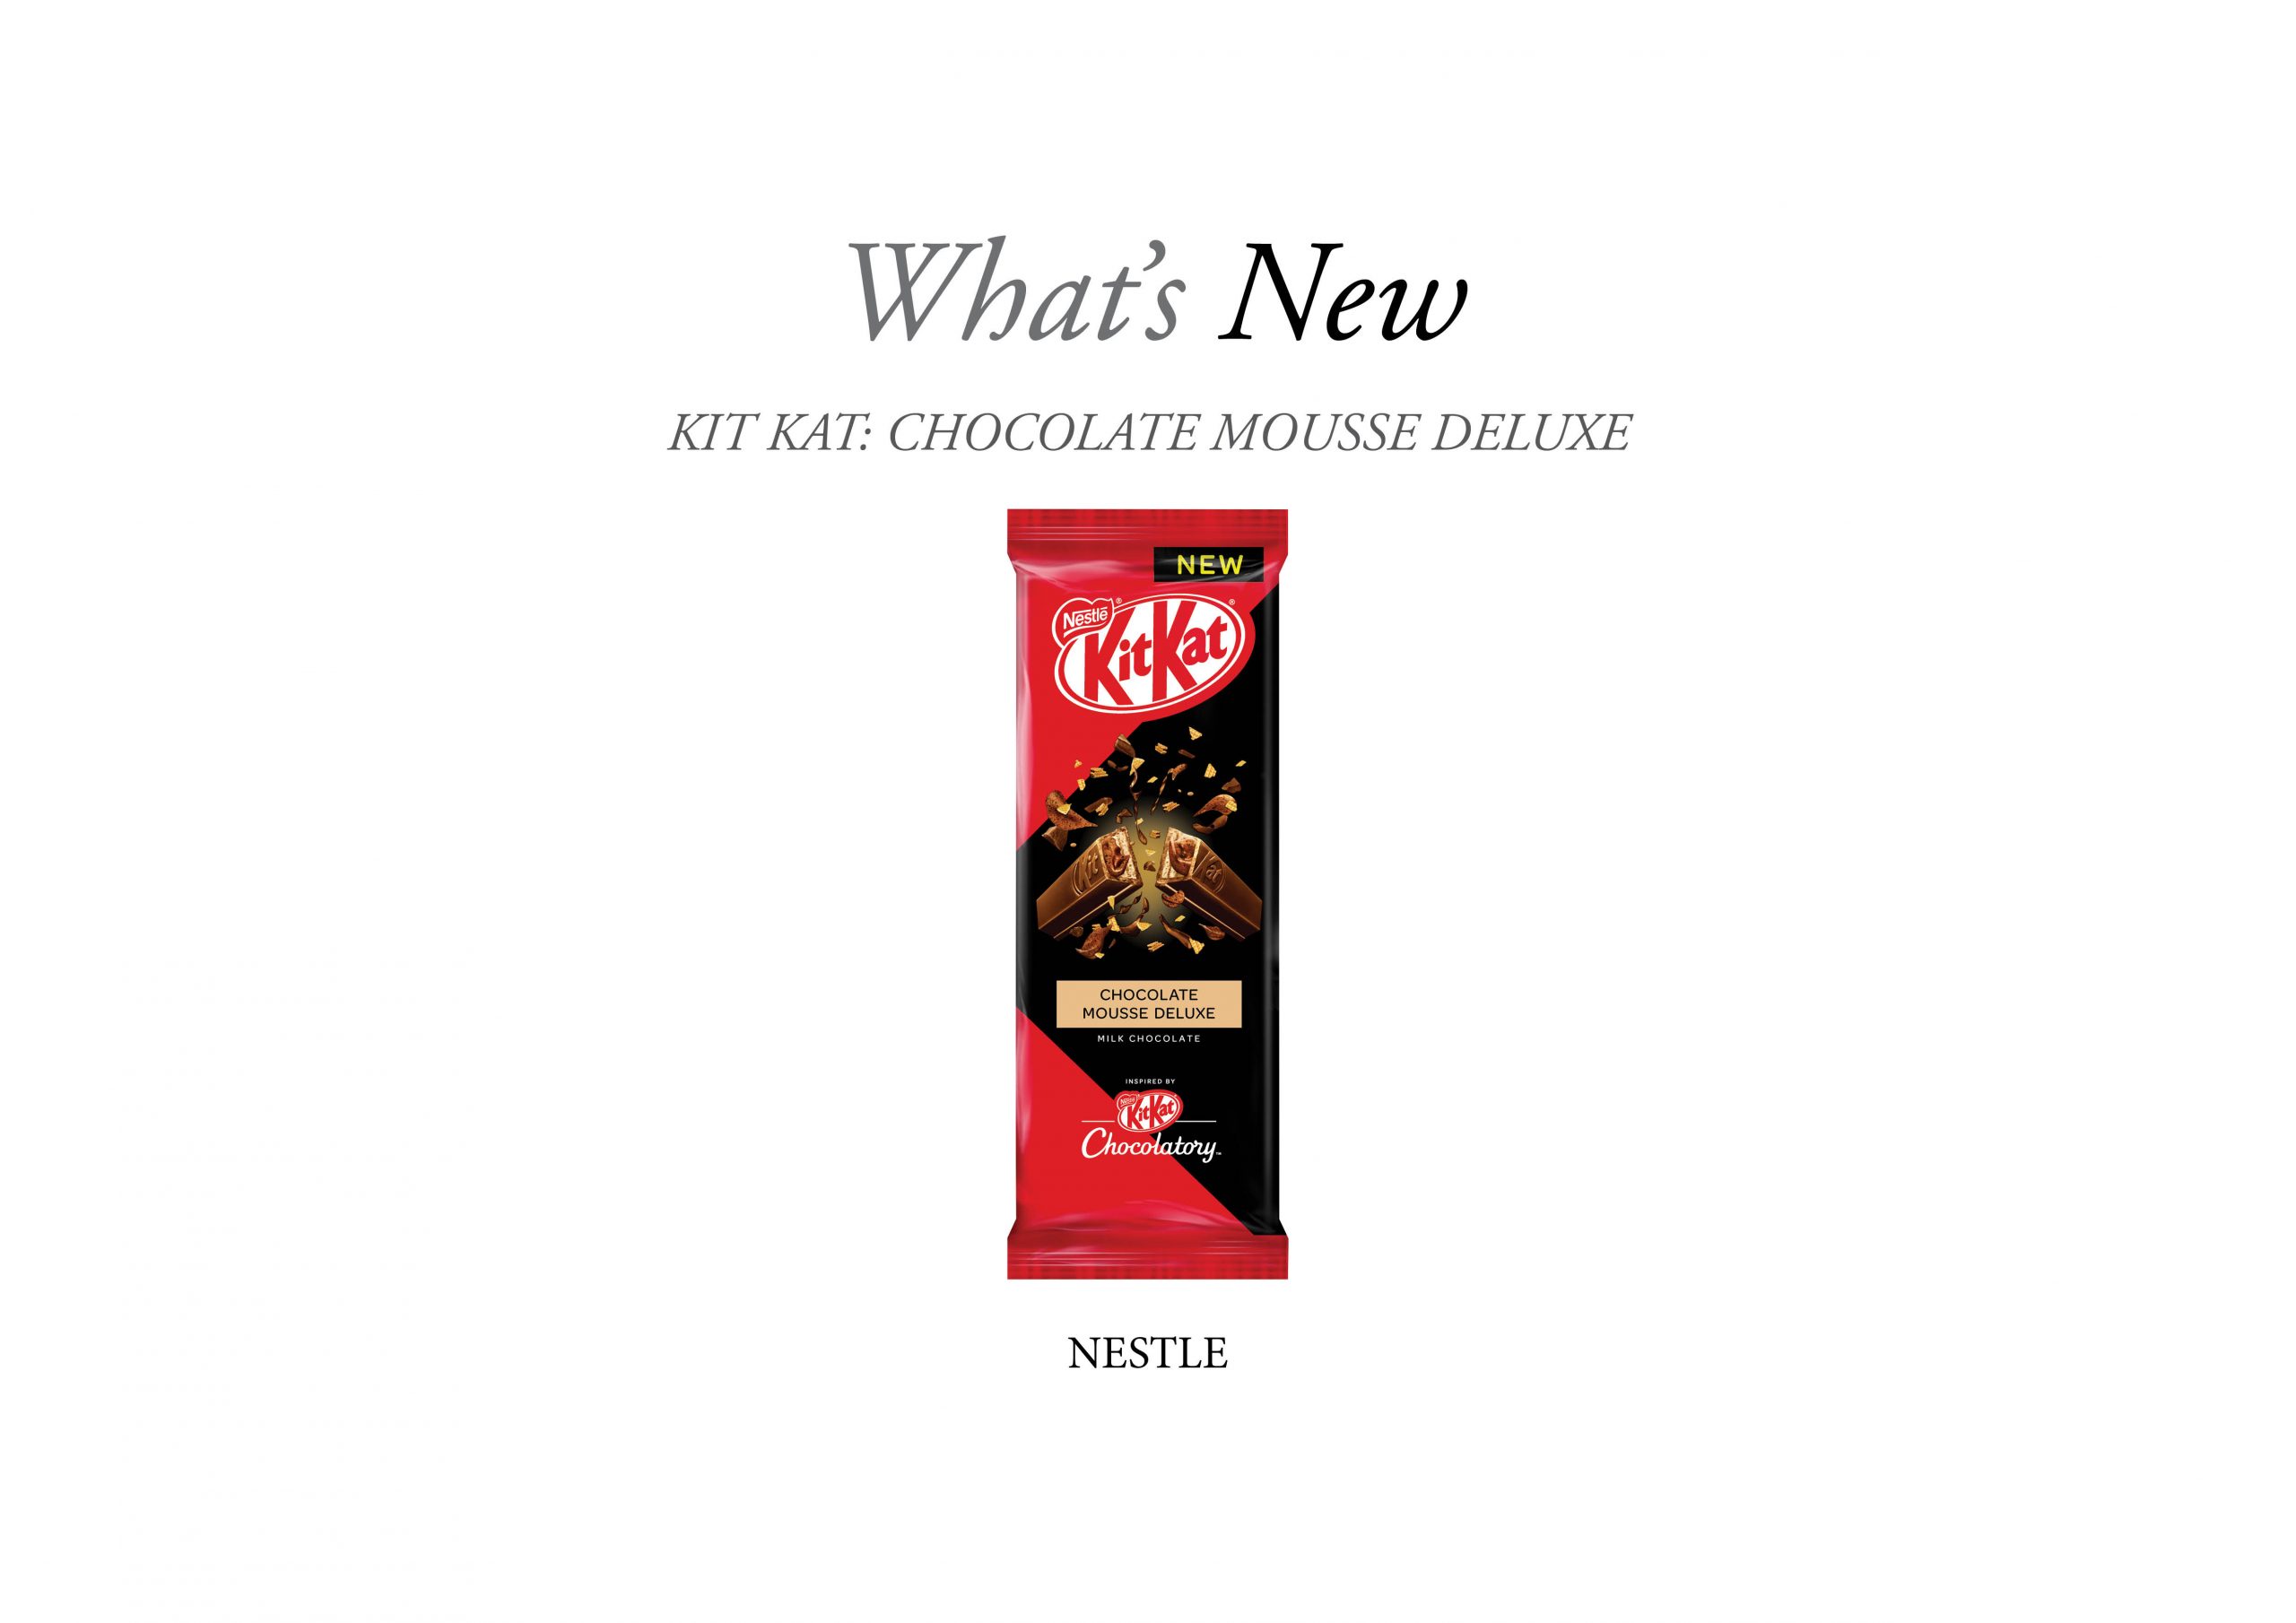 ulækkert myg Rindende KITKAT CHOCOLATE MOUSSE DELUXE HAS LAUNCHED - Supermarket News